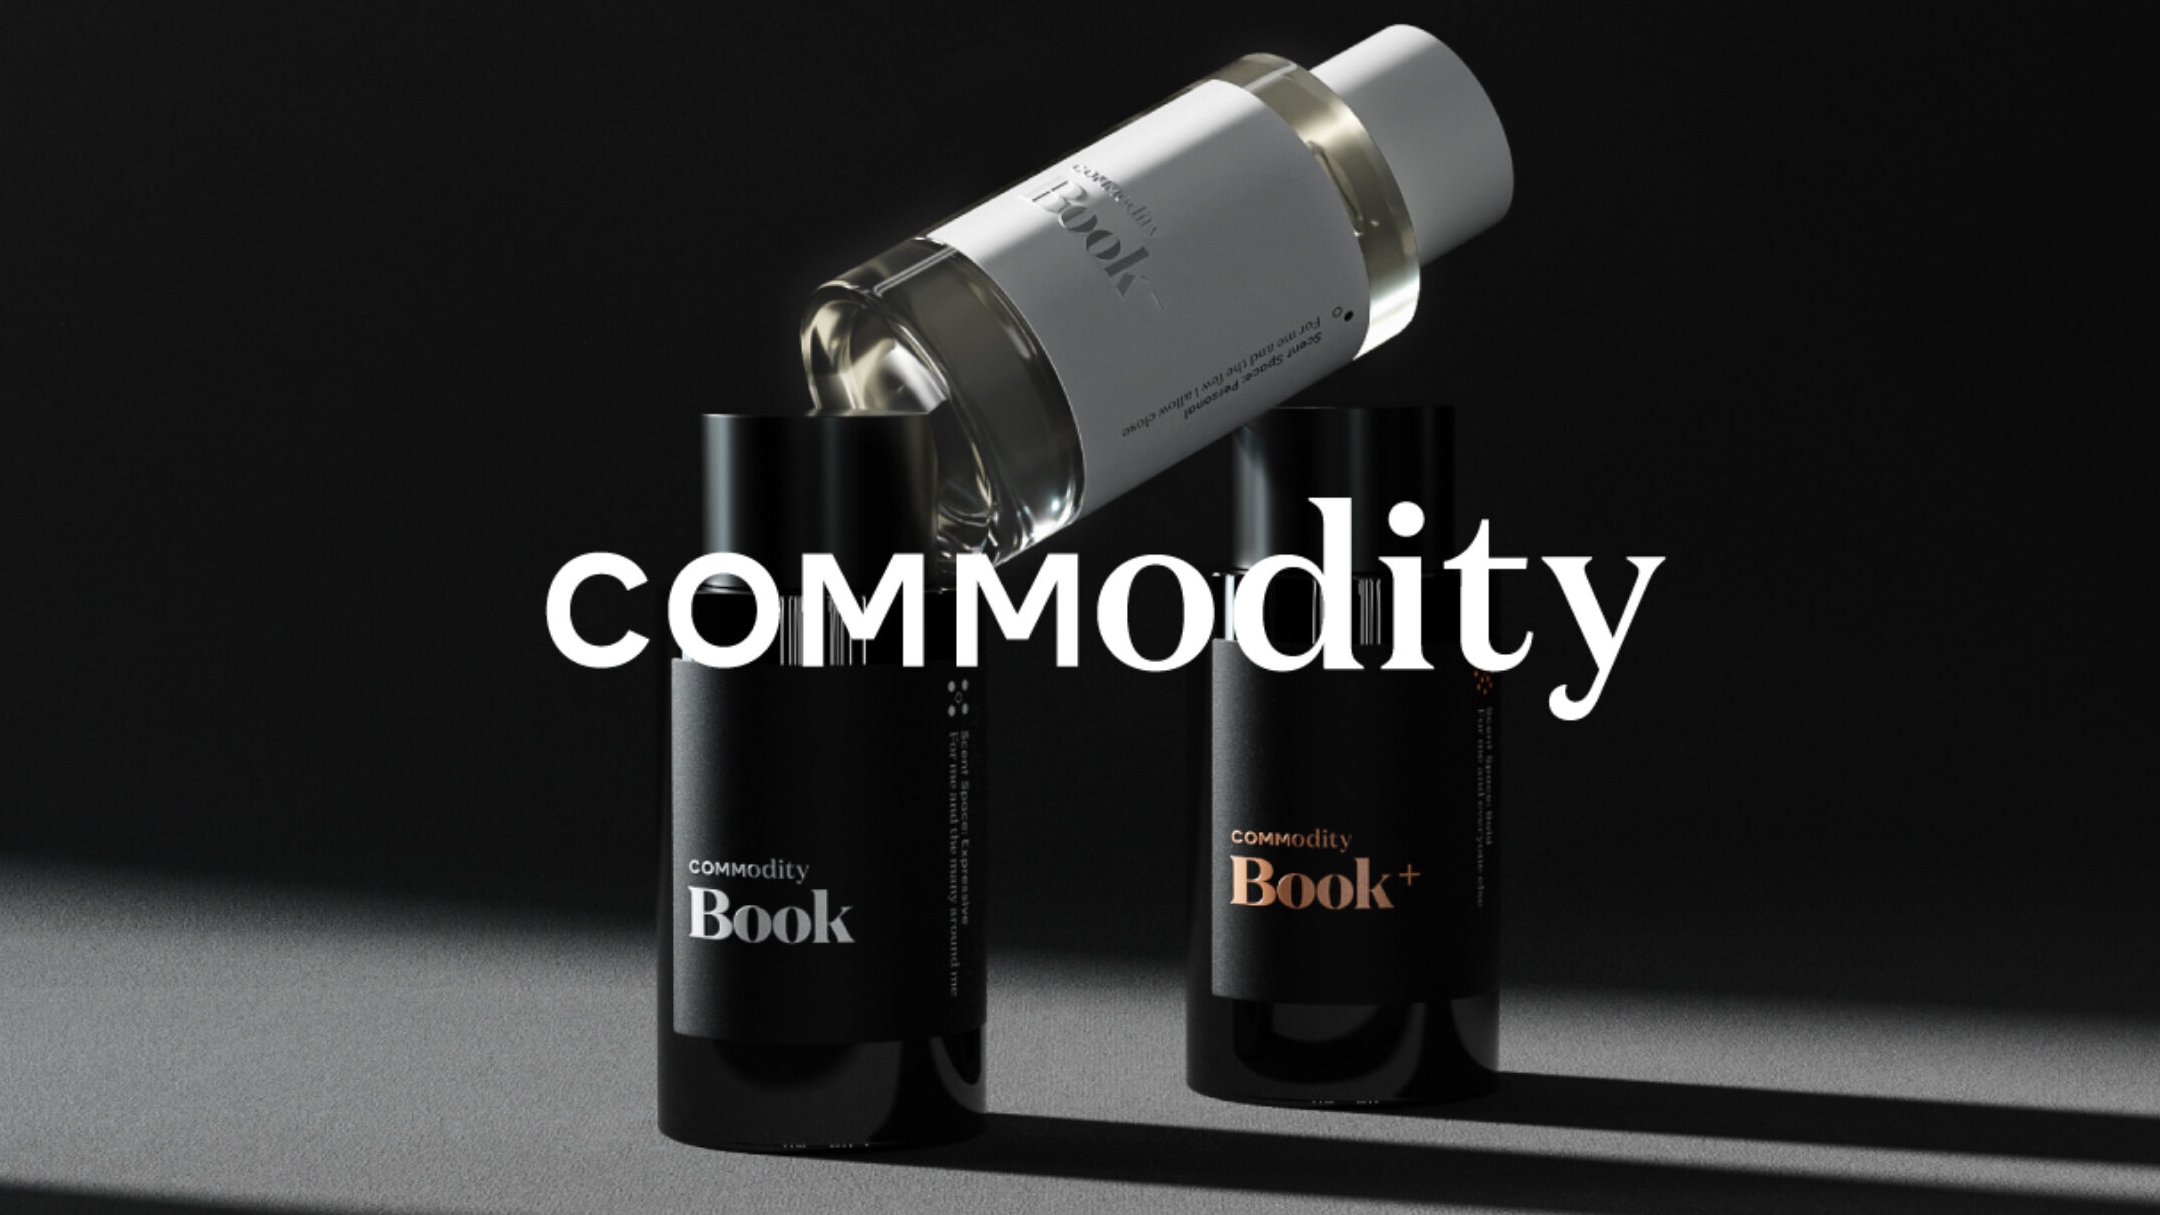 Commodity rebranding after changing hands several times